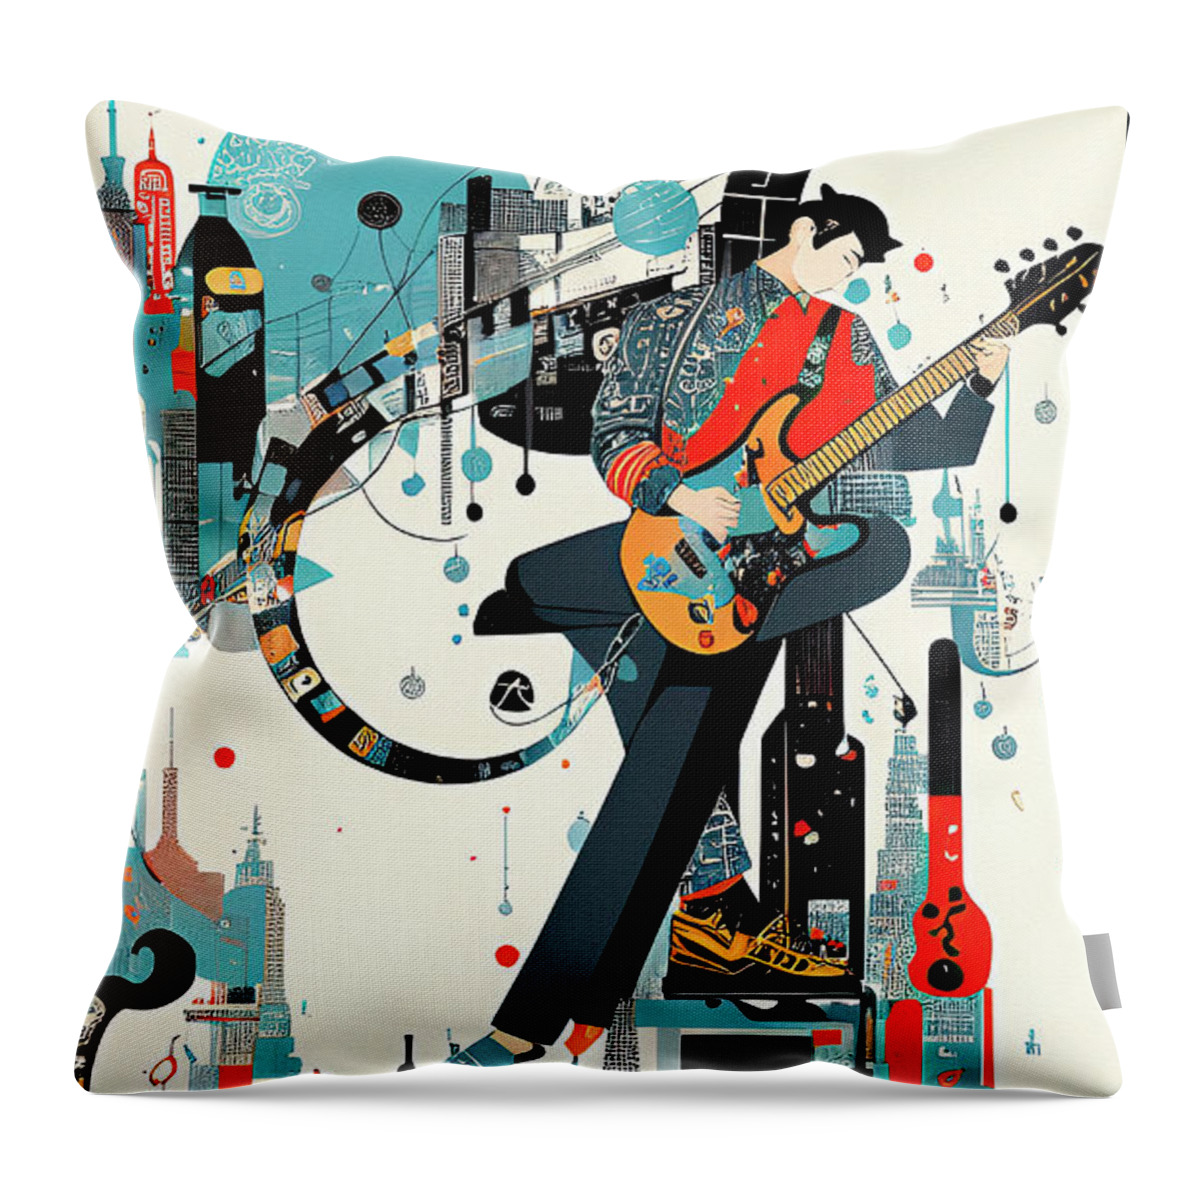 Music City Throw Pillow featuring the digital art Abstract Music City Art Guitar by Ginette Callaway